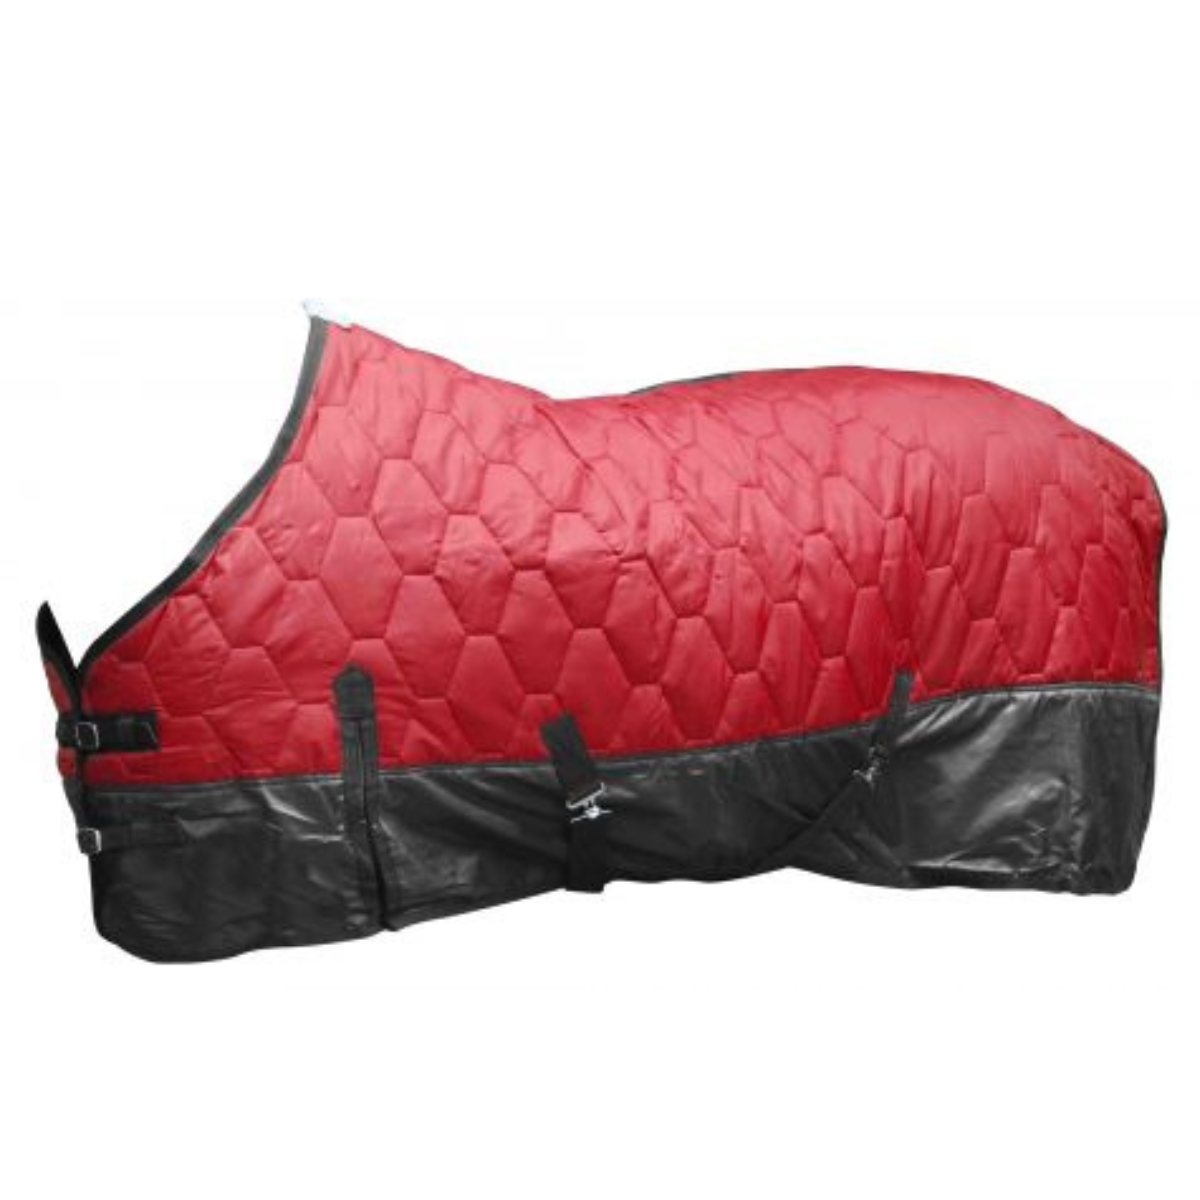 Showman ® 420 Denier Quilted Nylon Blanket is Constructed of 420 Denier Outer Shell with 70 Denier Rip Stop Lining and Nylon Bound Edges. - Double T Saddles